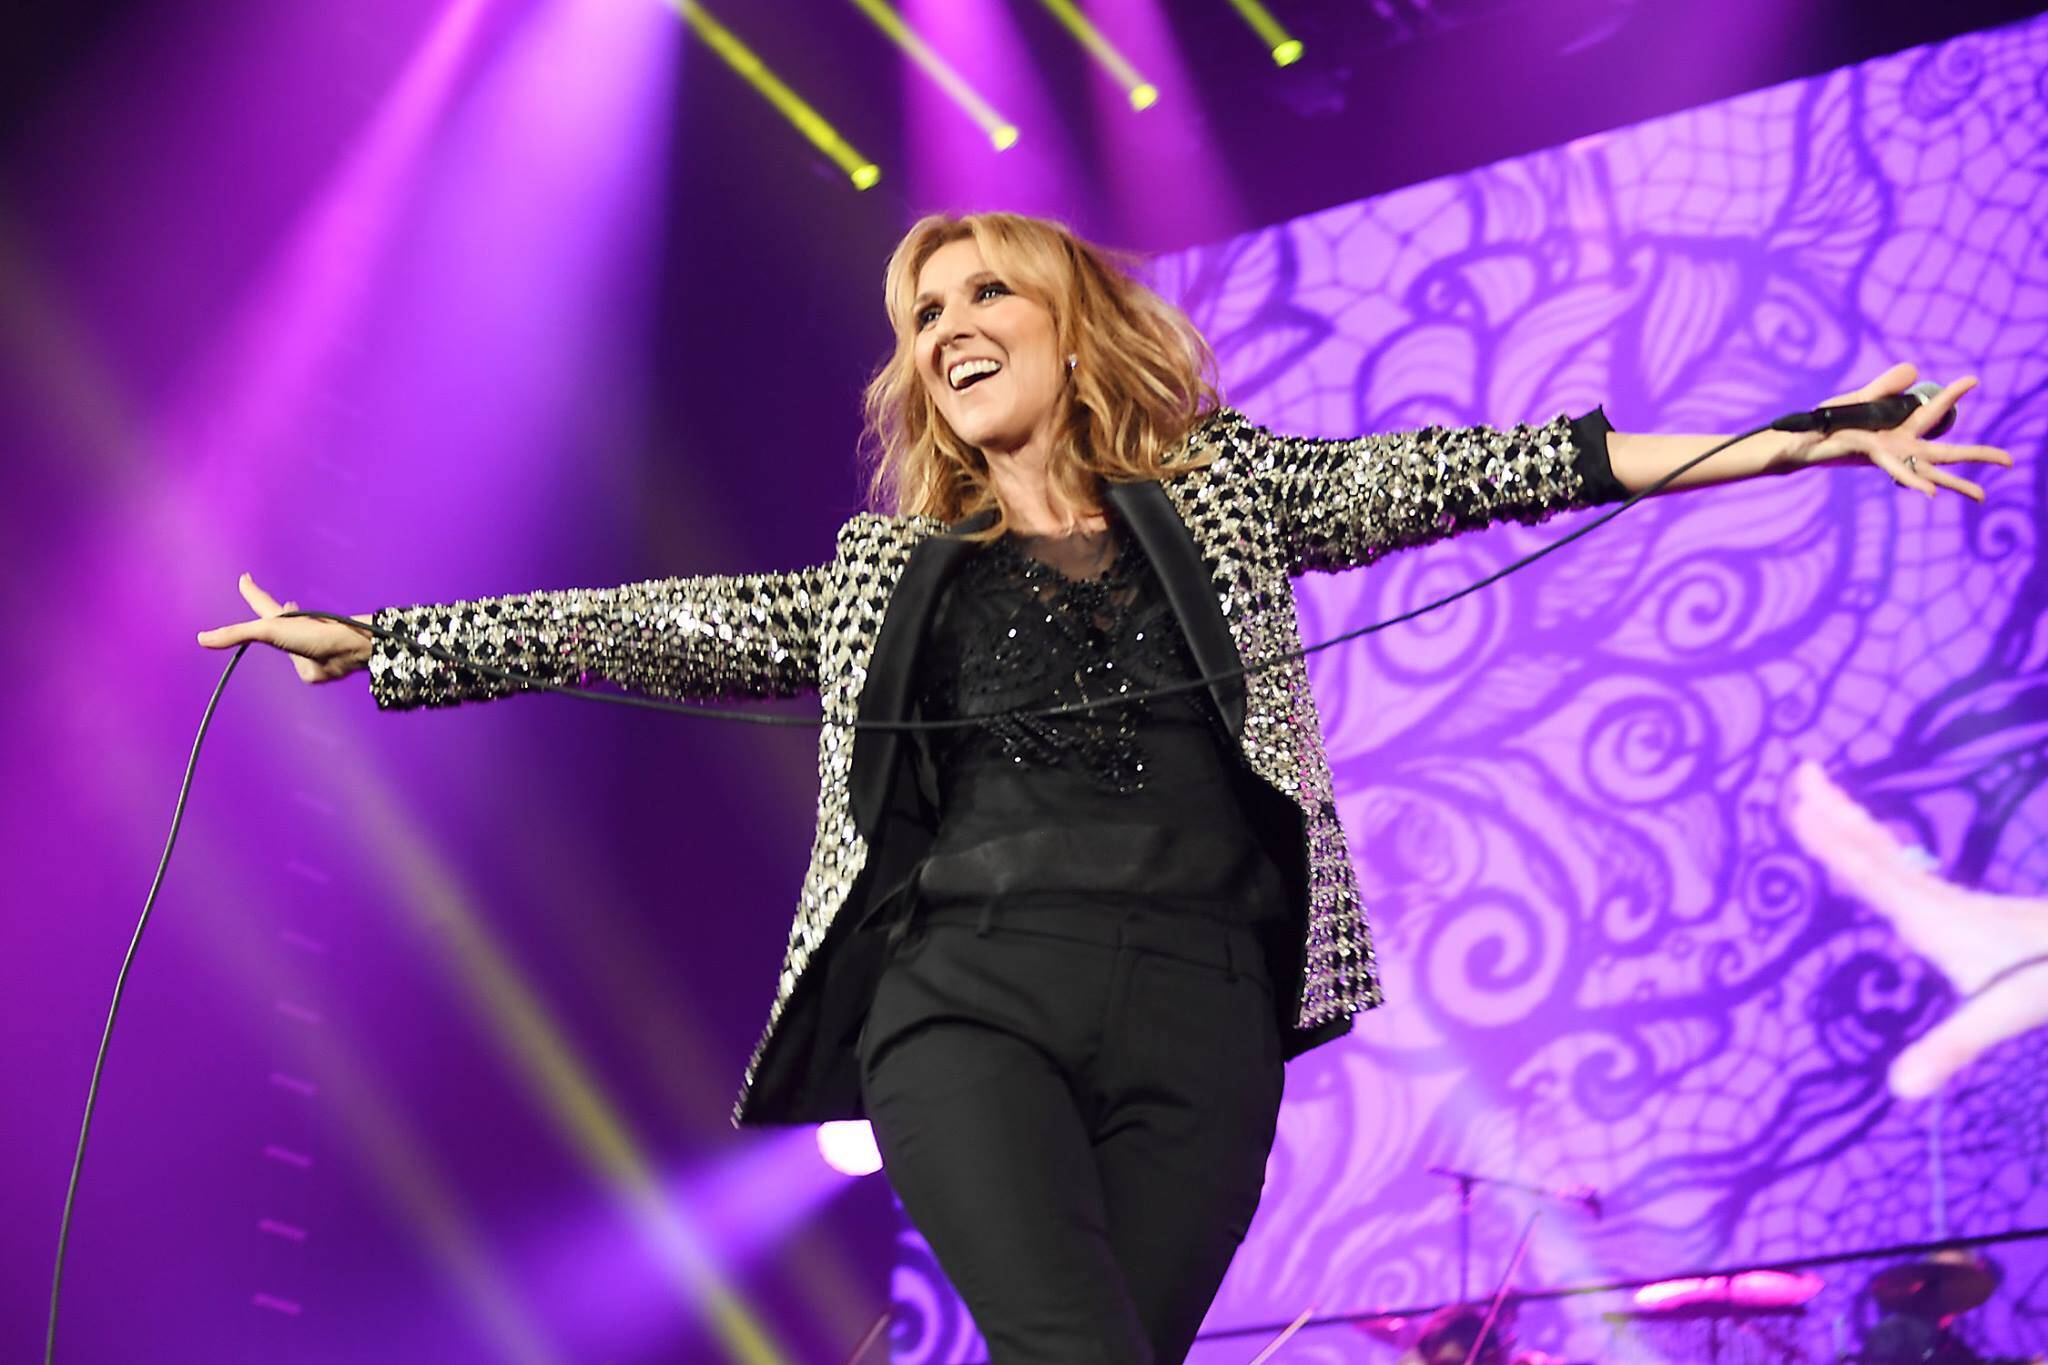 Celine Dion is coming to Toronto on her North American concert tour